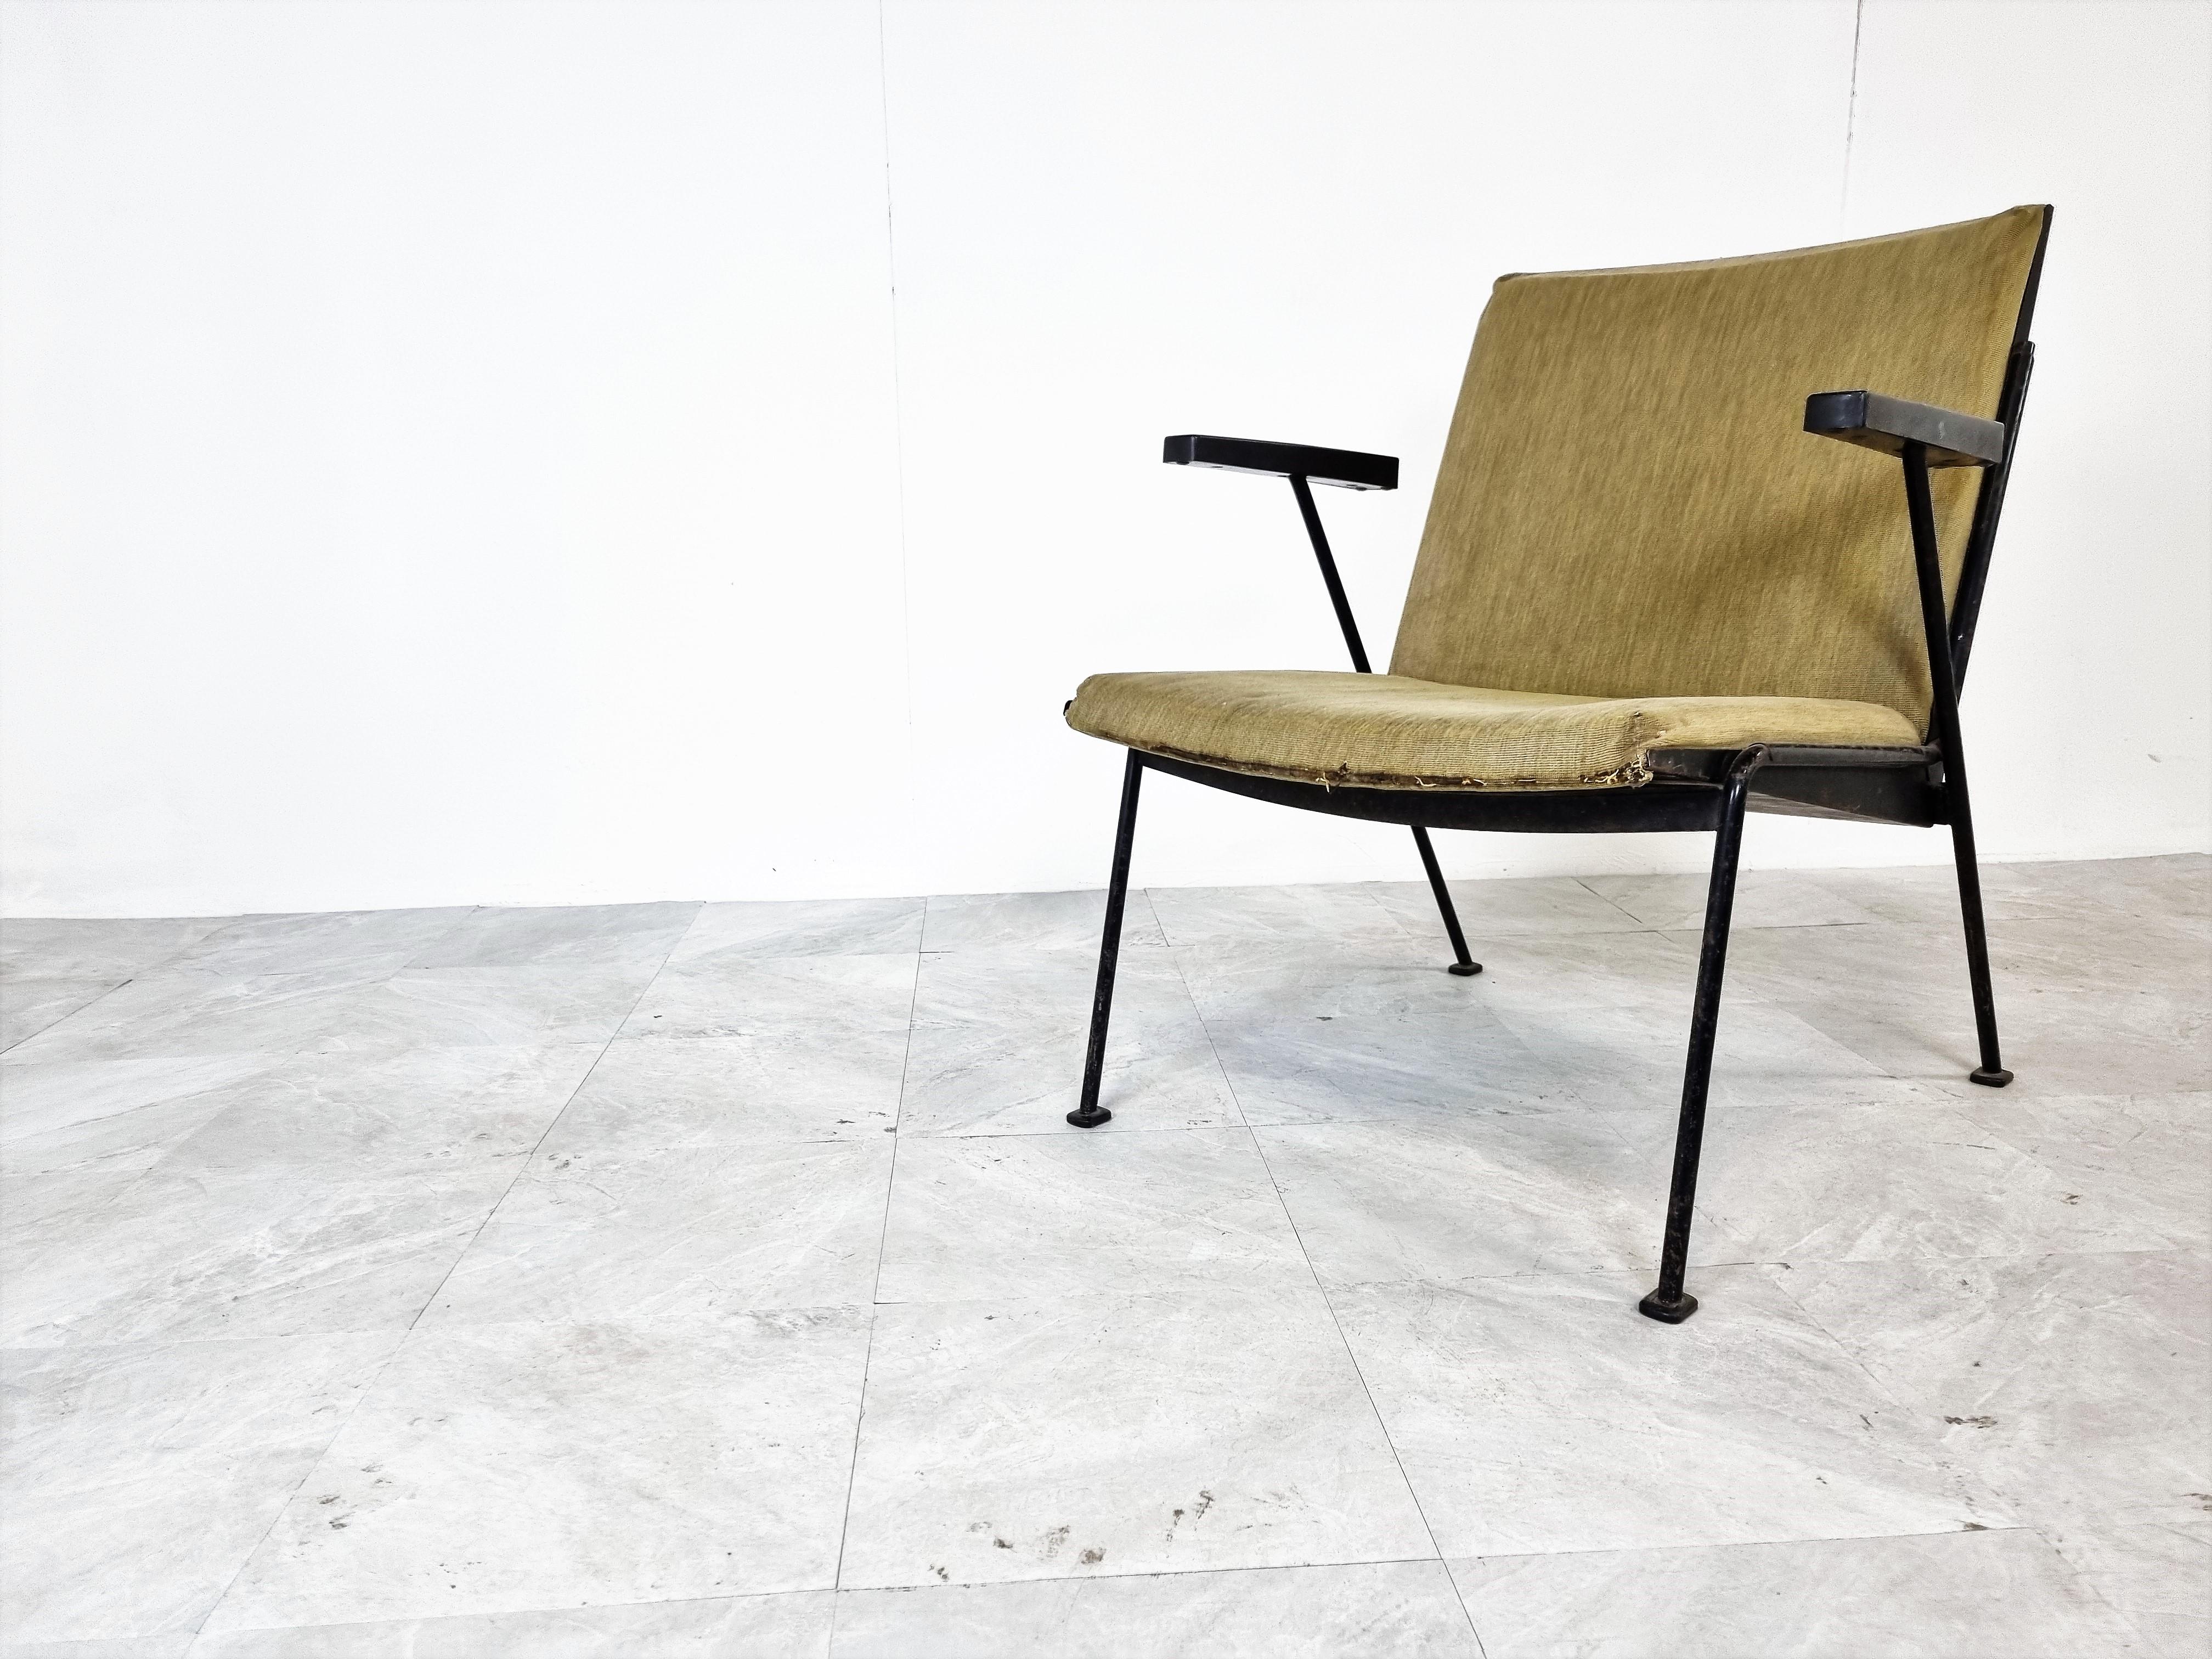 Elegant mid century Oase armchair by Wim Rietvel in untouched original condition.

Wim Rietveld was the son of famous designer and architect Gerrit Rietveld.

This chair has not been touched and is fully original.

Ofcourse the cushions foam